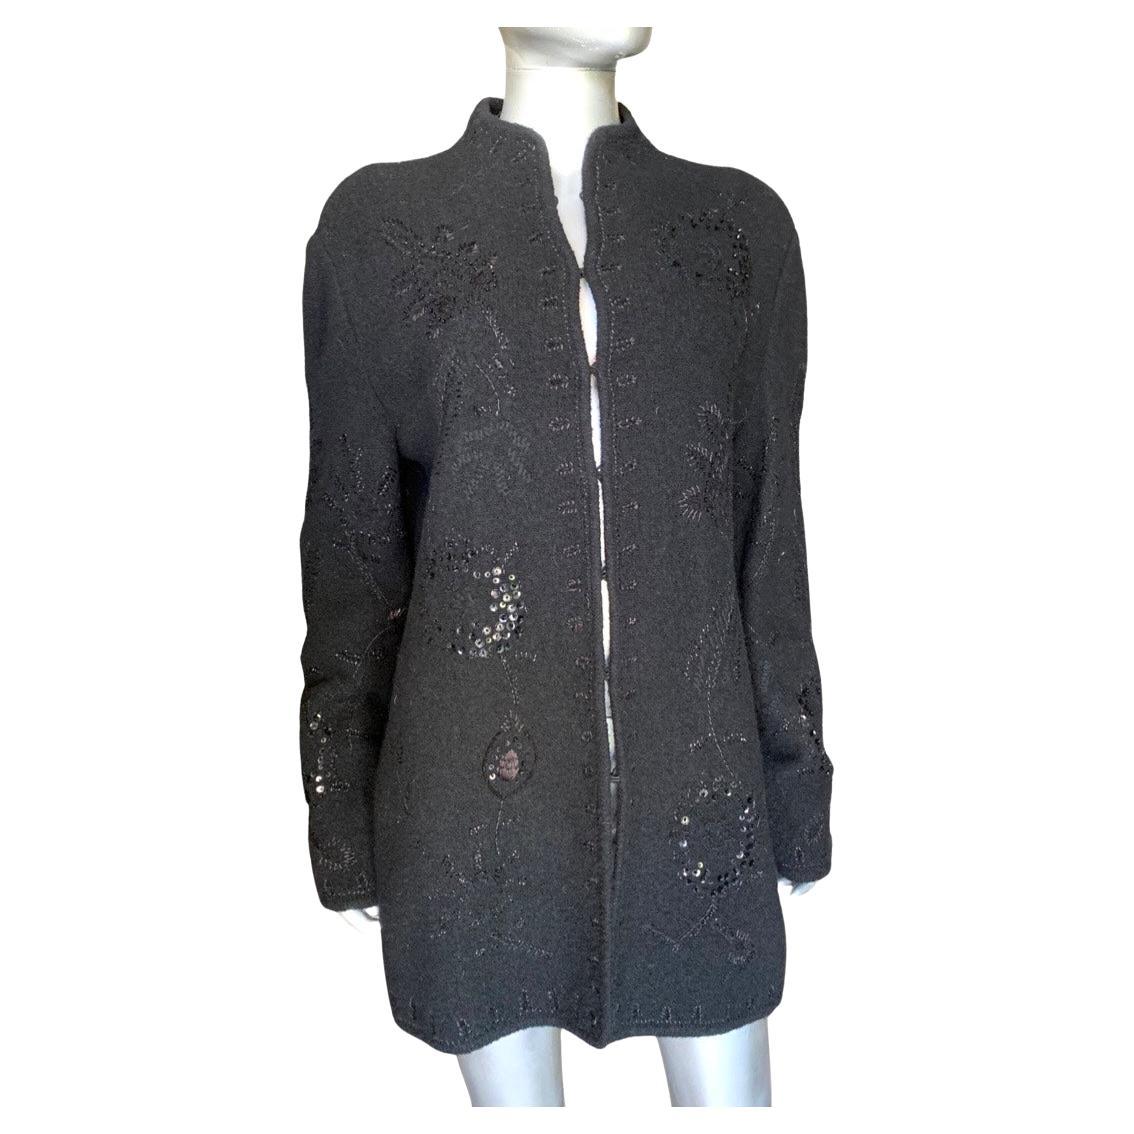 So happy to find another beautiful limited Edition piece by Worth New York. The size tag has been removed, but it is a Size Large. would fit sizes 12-16. beautifully made and embellished with sequins over black embroidery. Covered hook and eyes